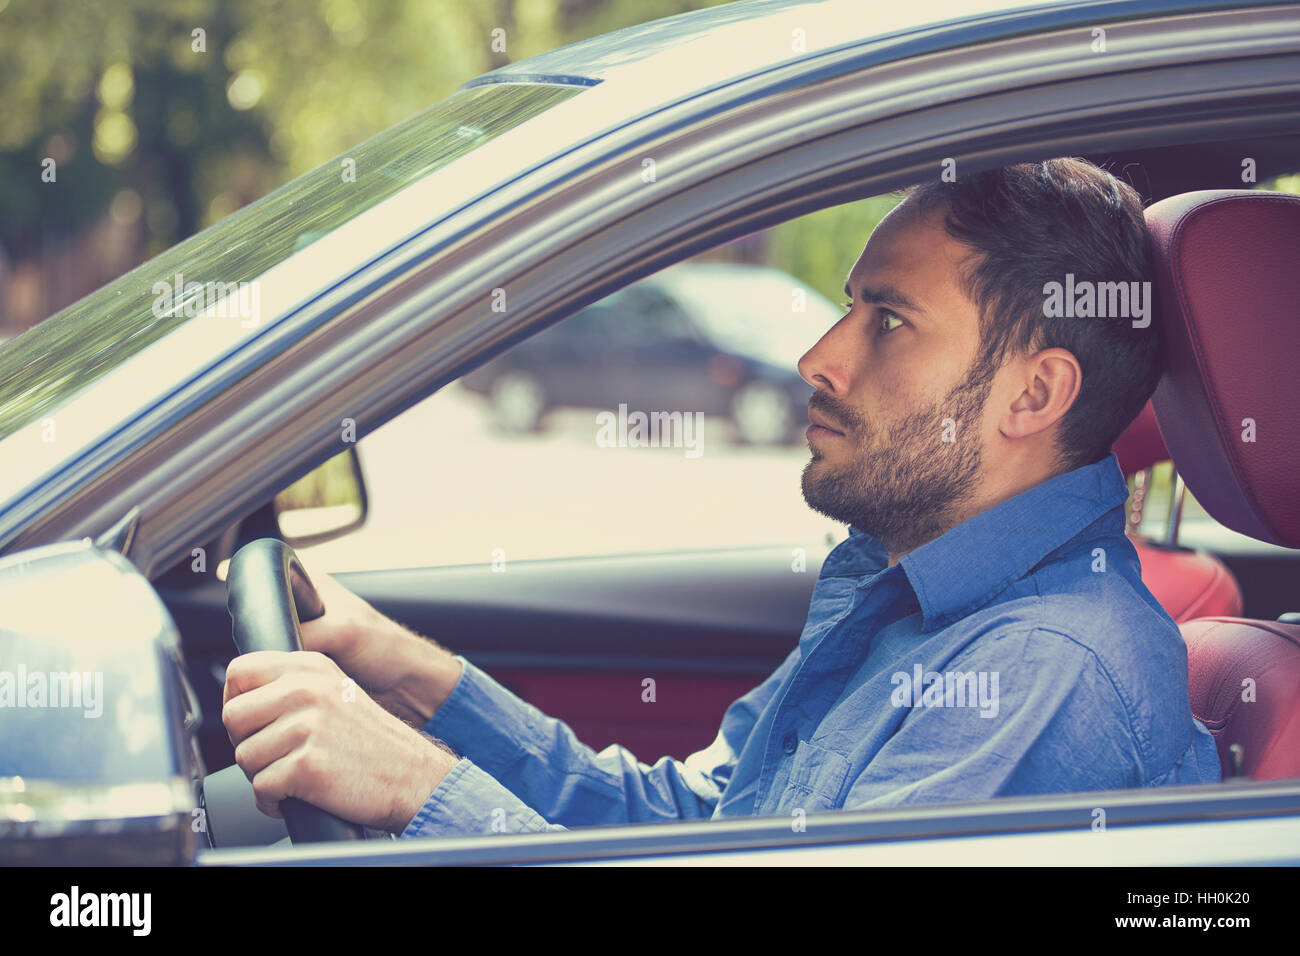 scared funny looking young man driver in the car. Human emotion face expression. Side window view of inexperienced anxious motorist Stock Photo